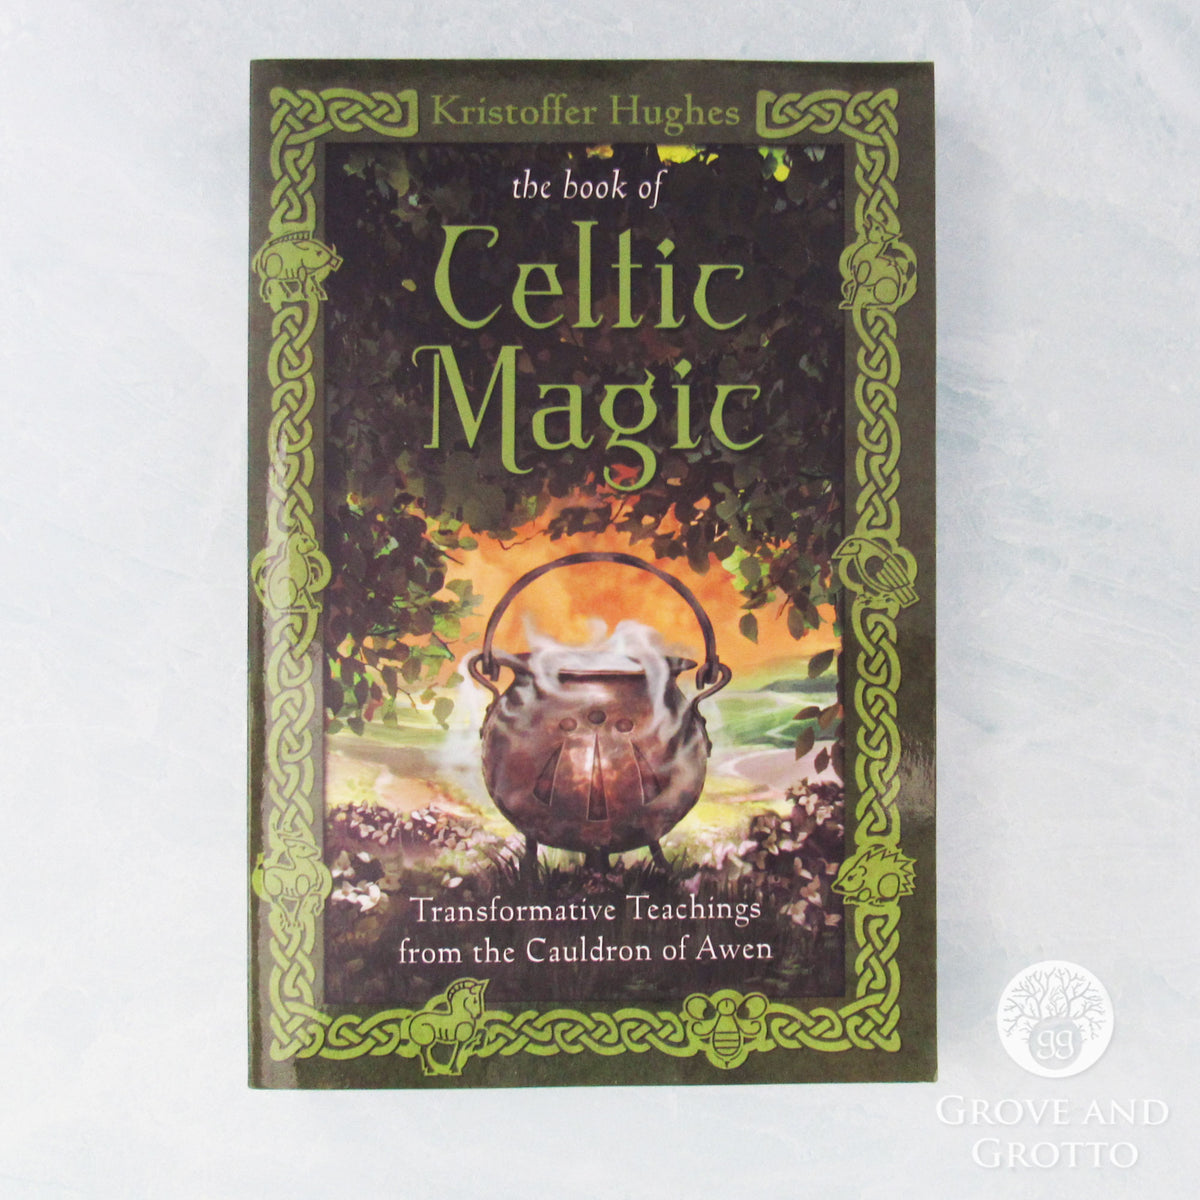 The Book of Celtic Magic by Kristoffer Hughes – Grove and Grotto